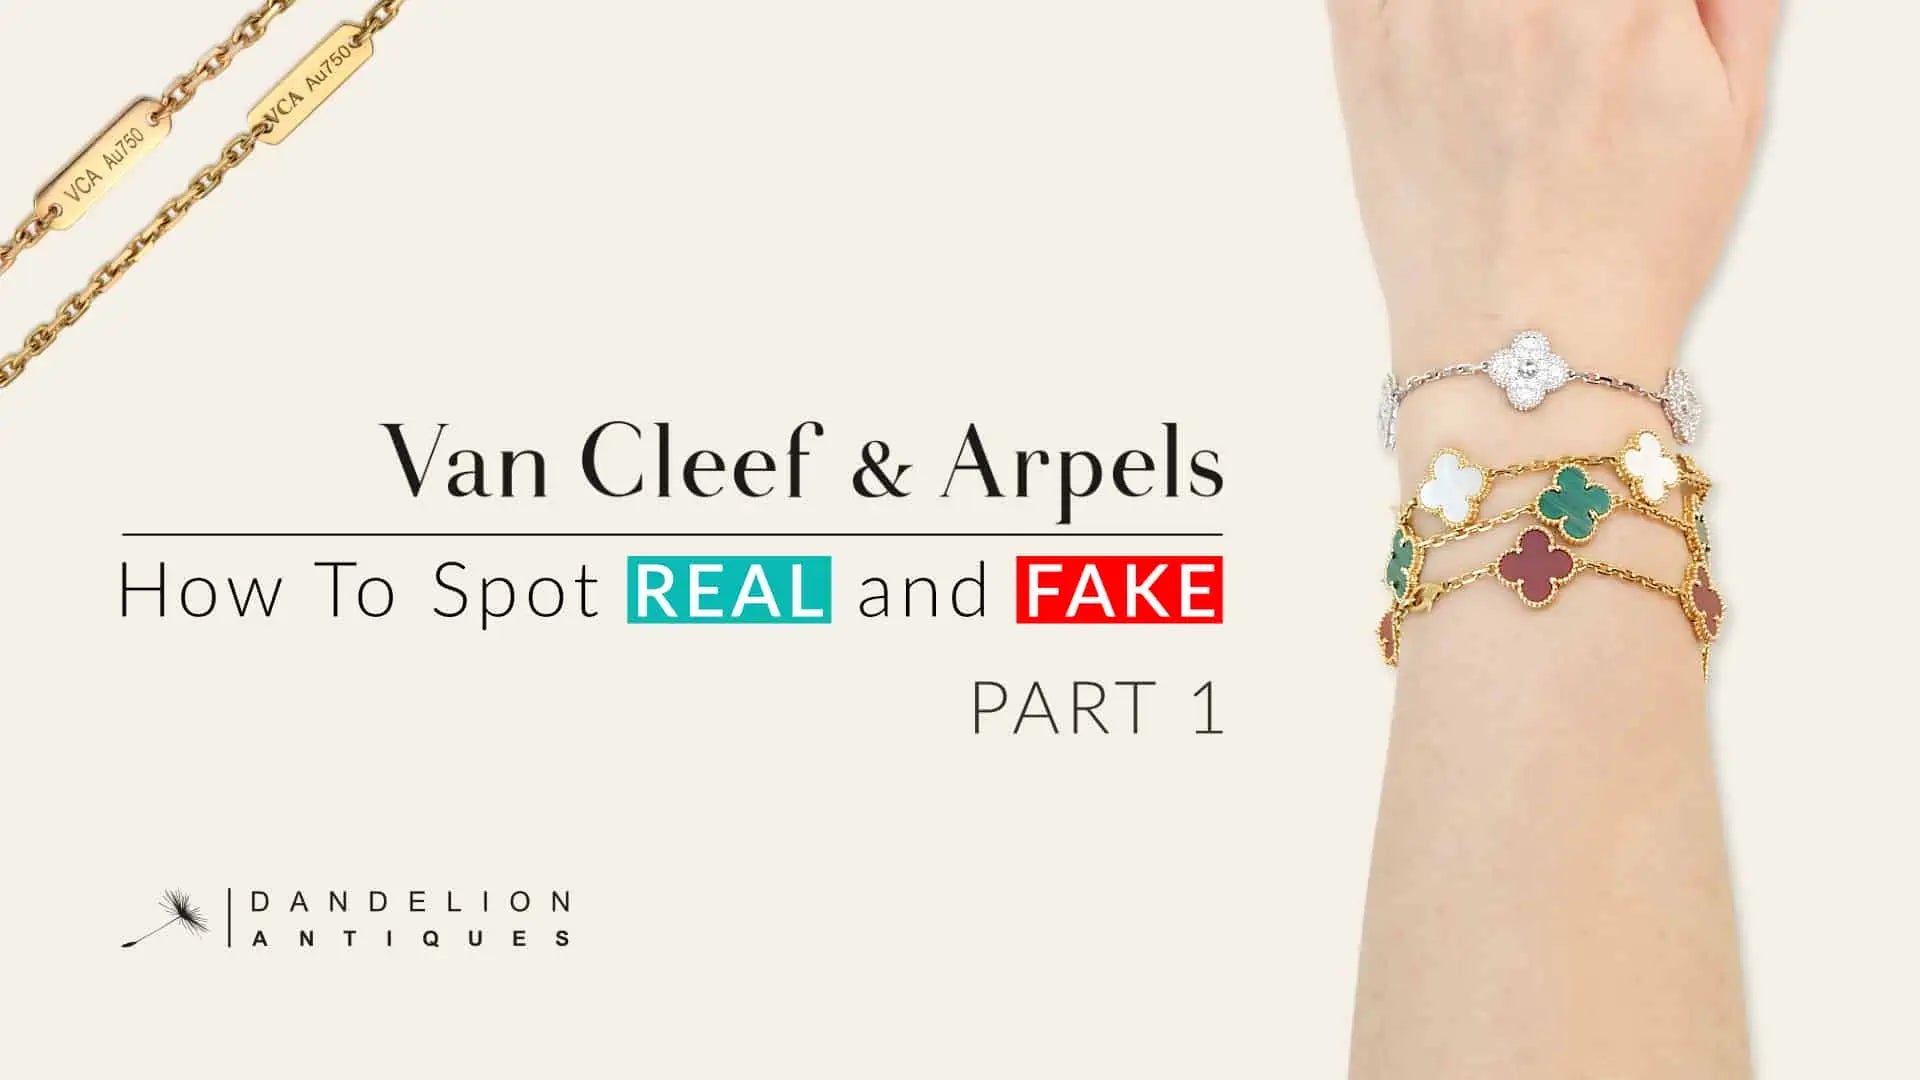 Van Cleef & Arpels How to Spot REAL and FAKE – Dandelion Antiques